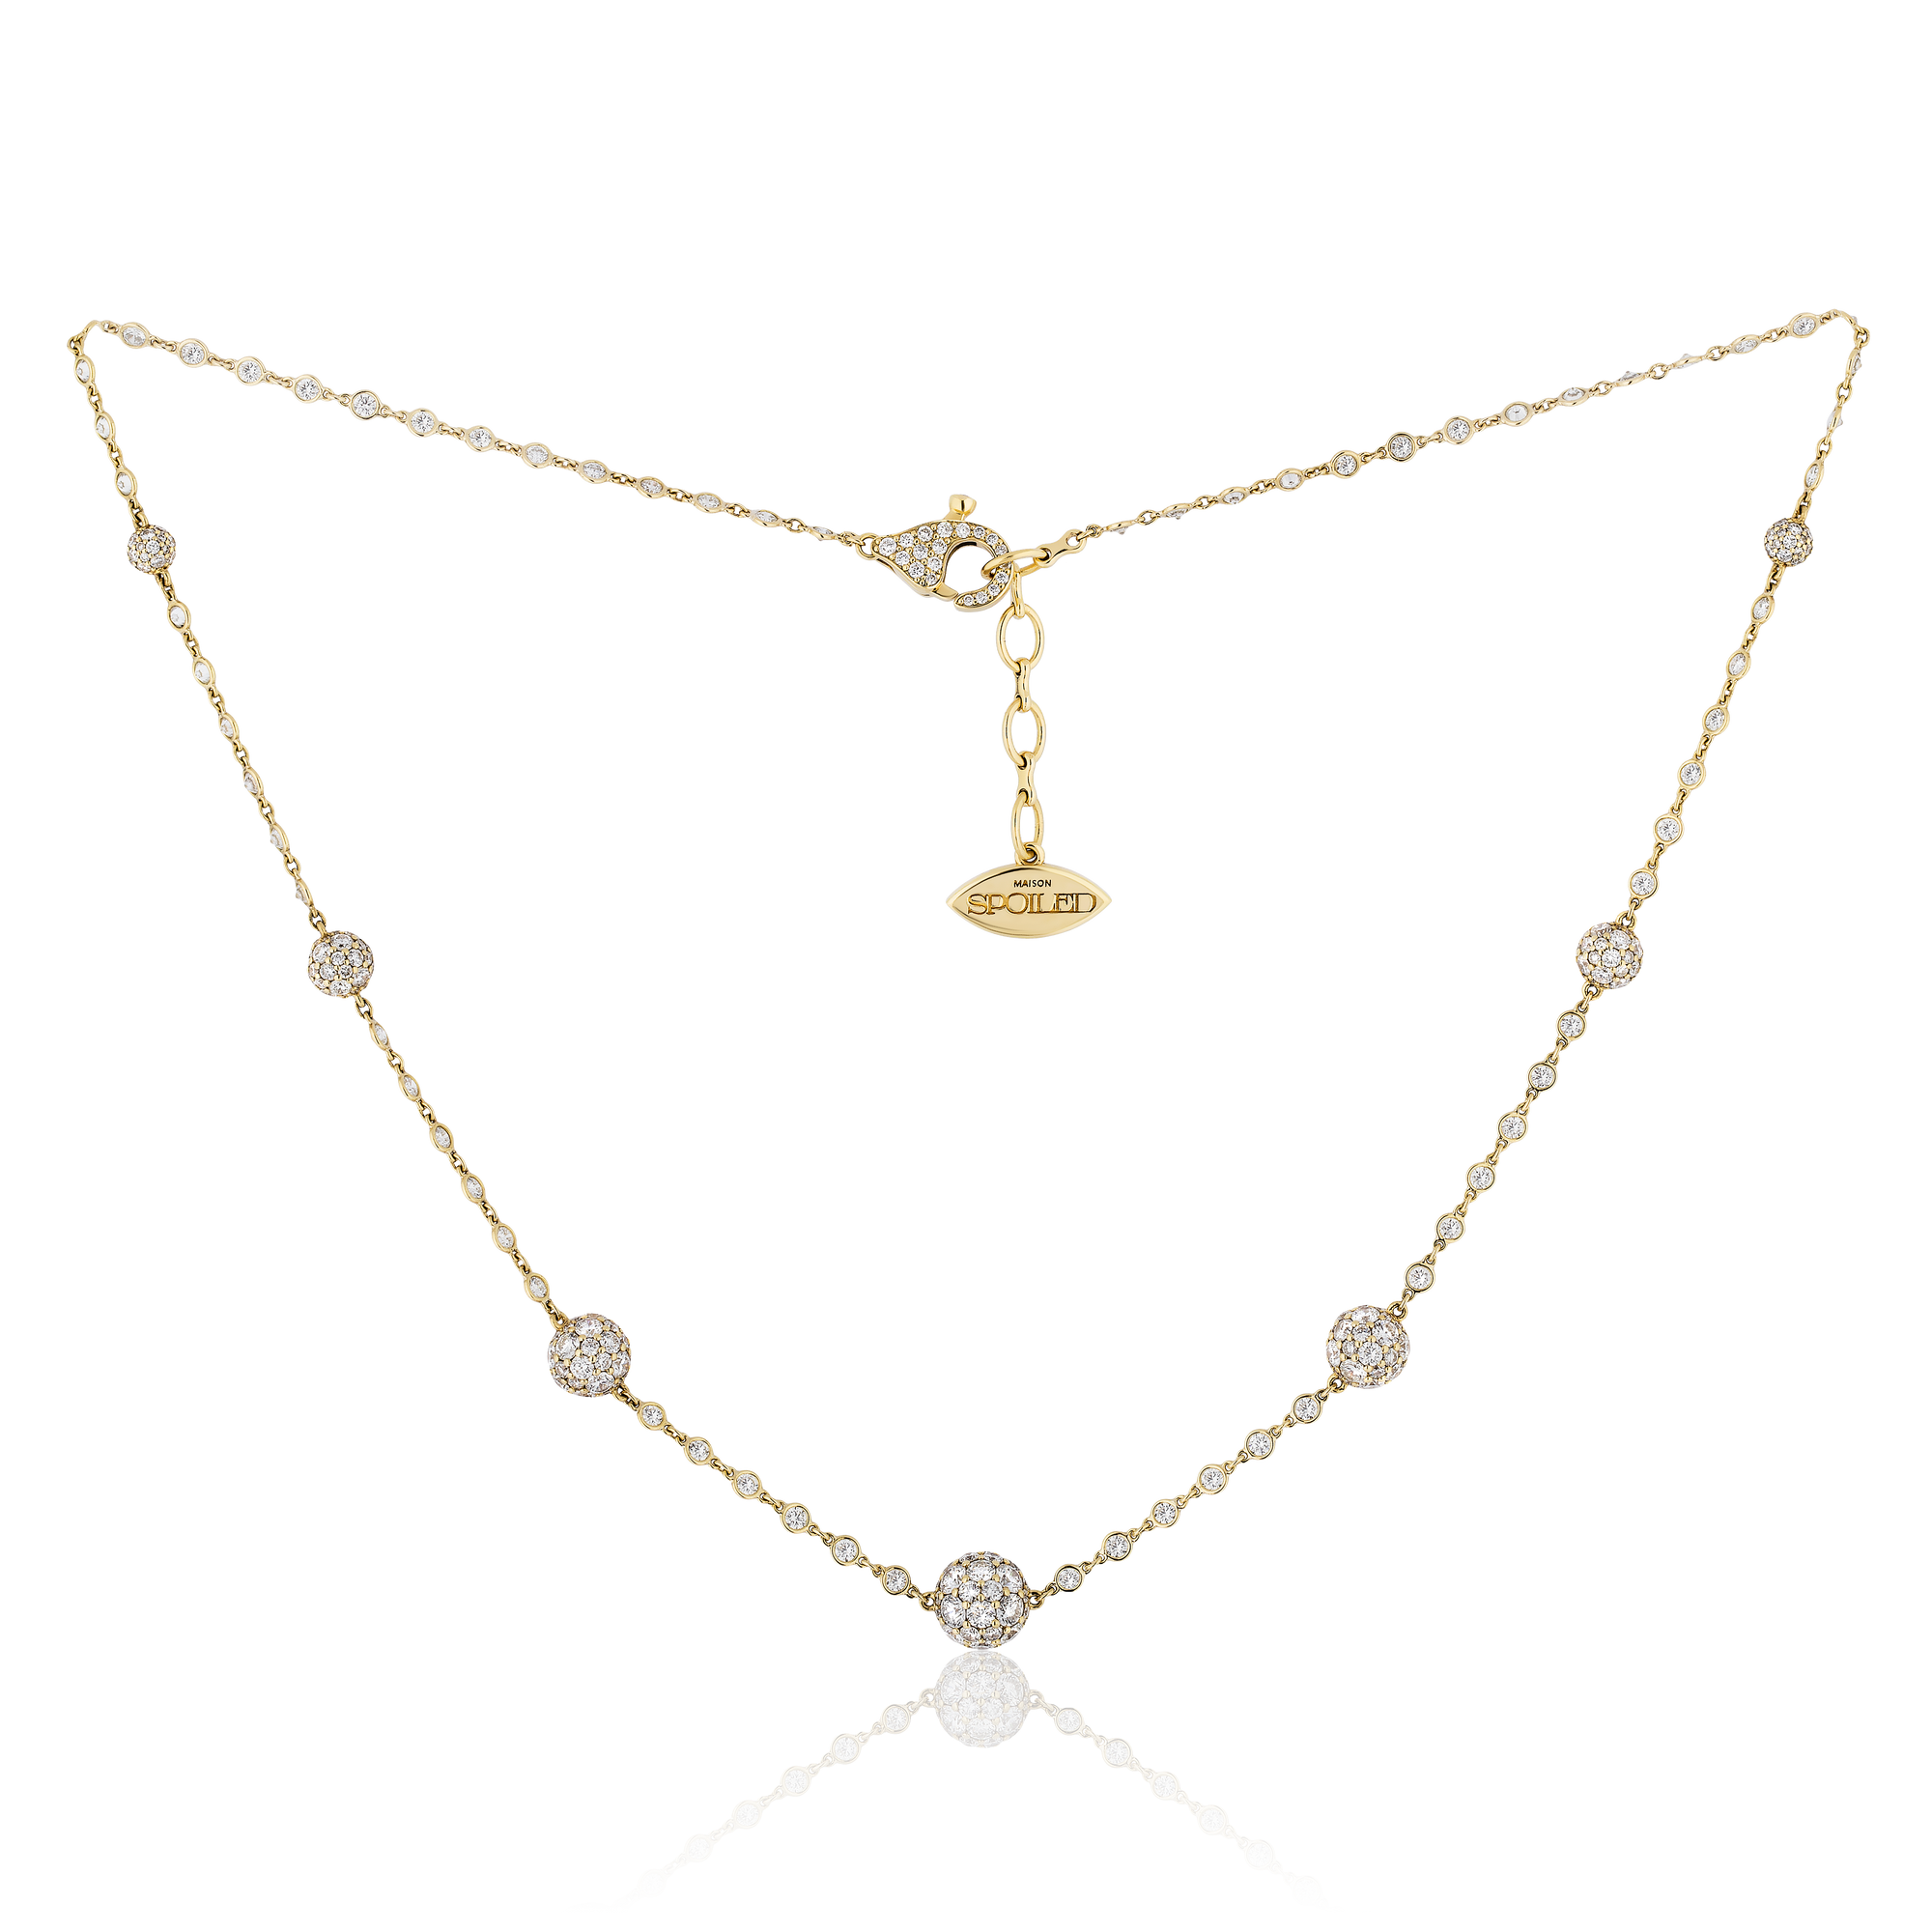 Celestial Graduating Charm Necklace with Spoiled Chain